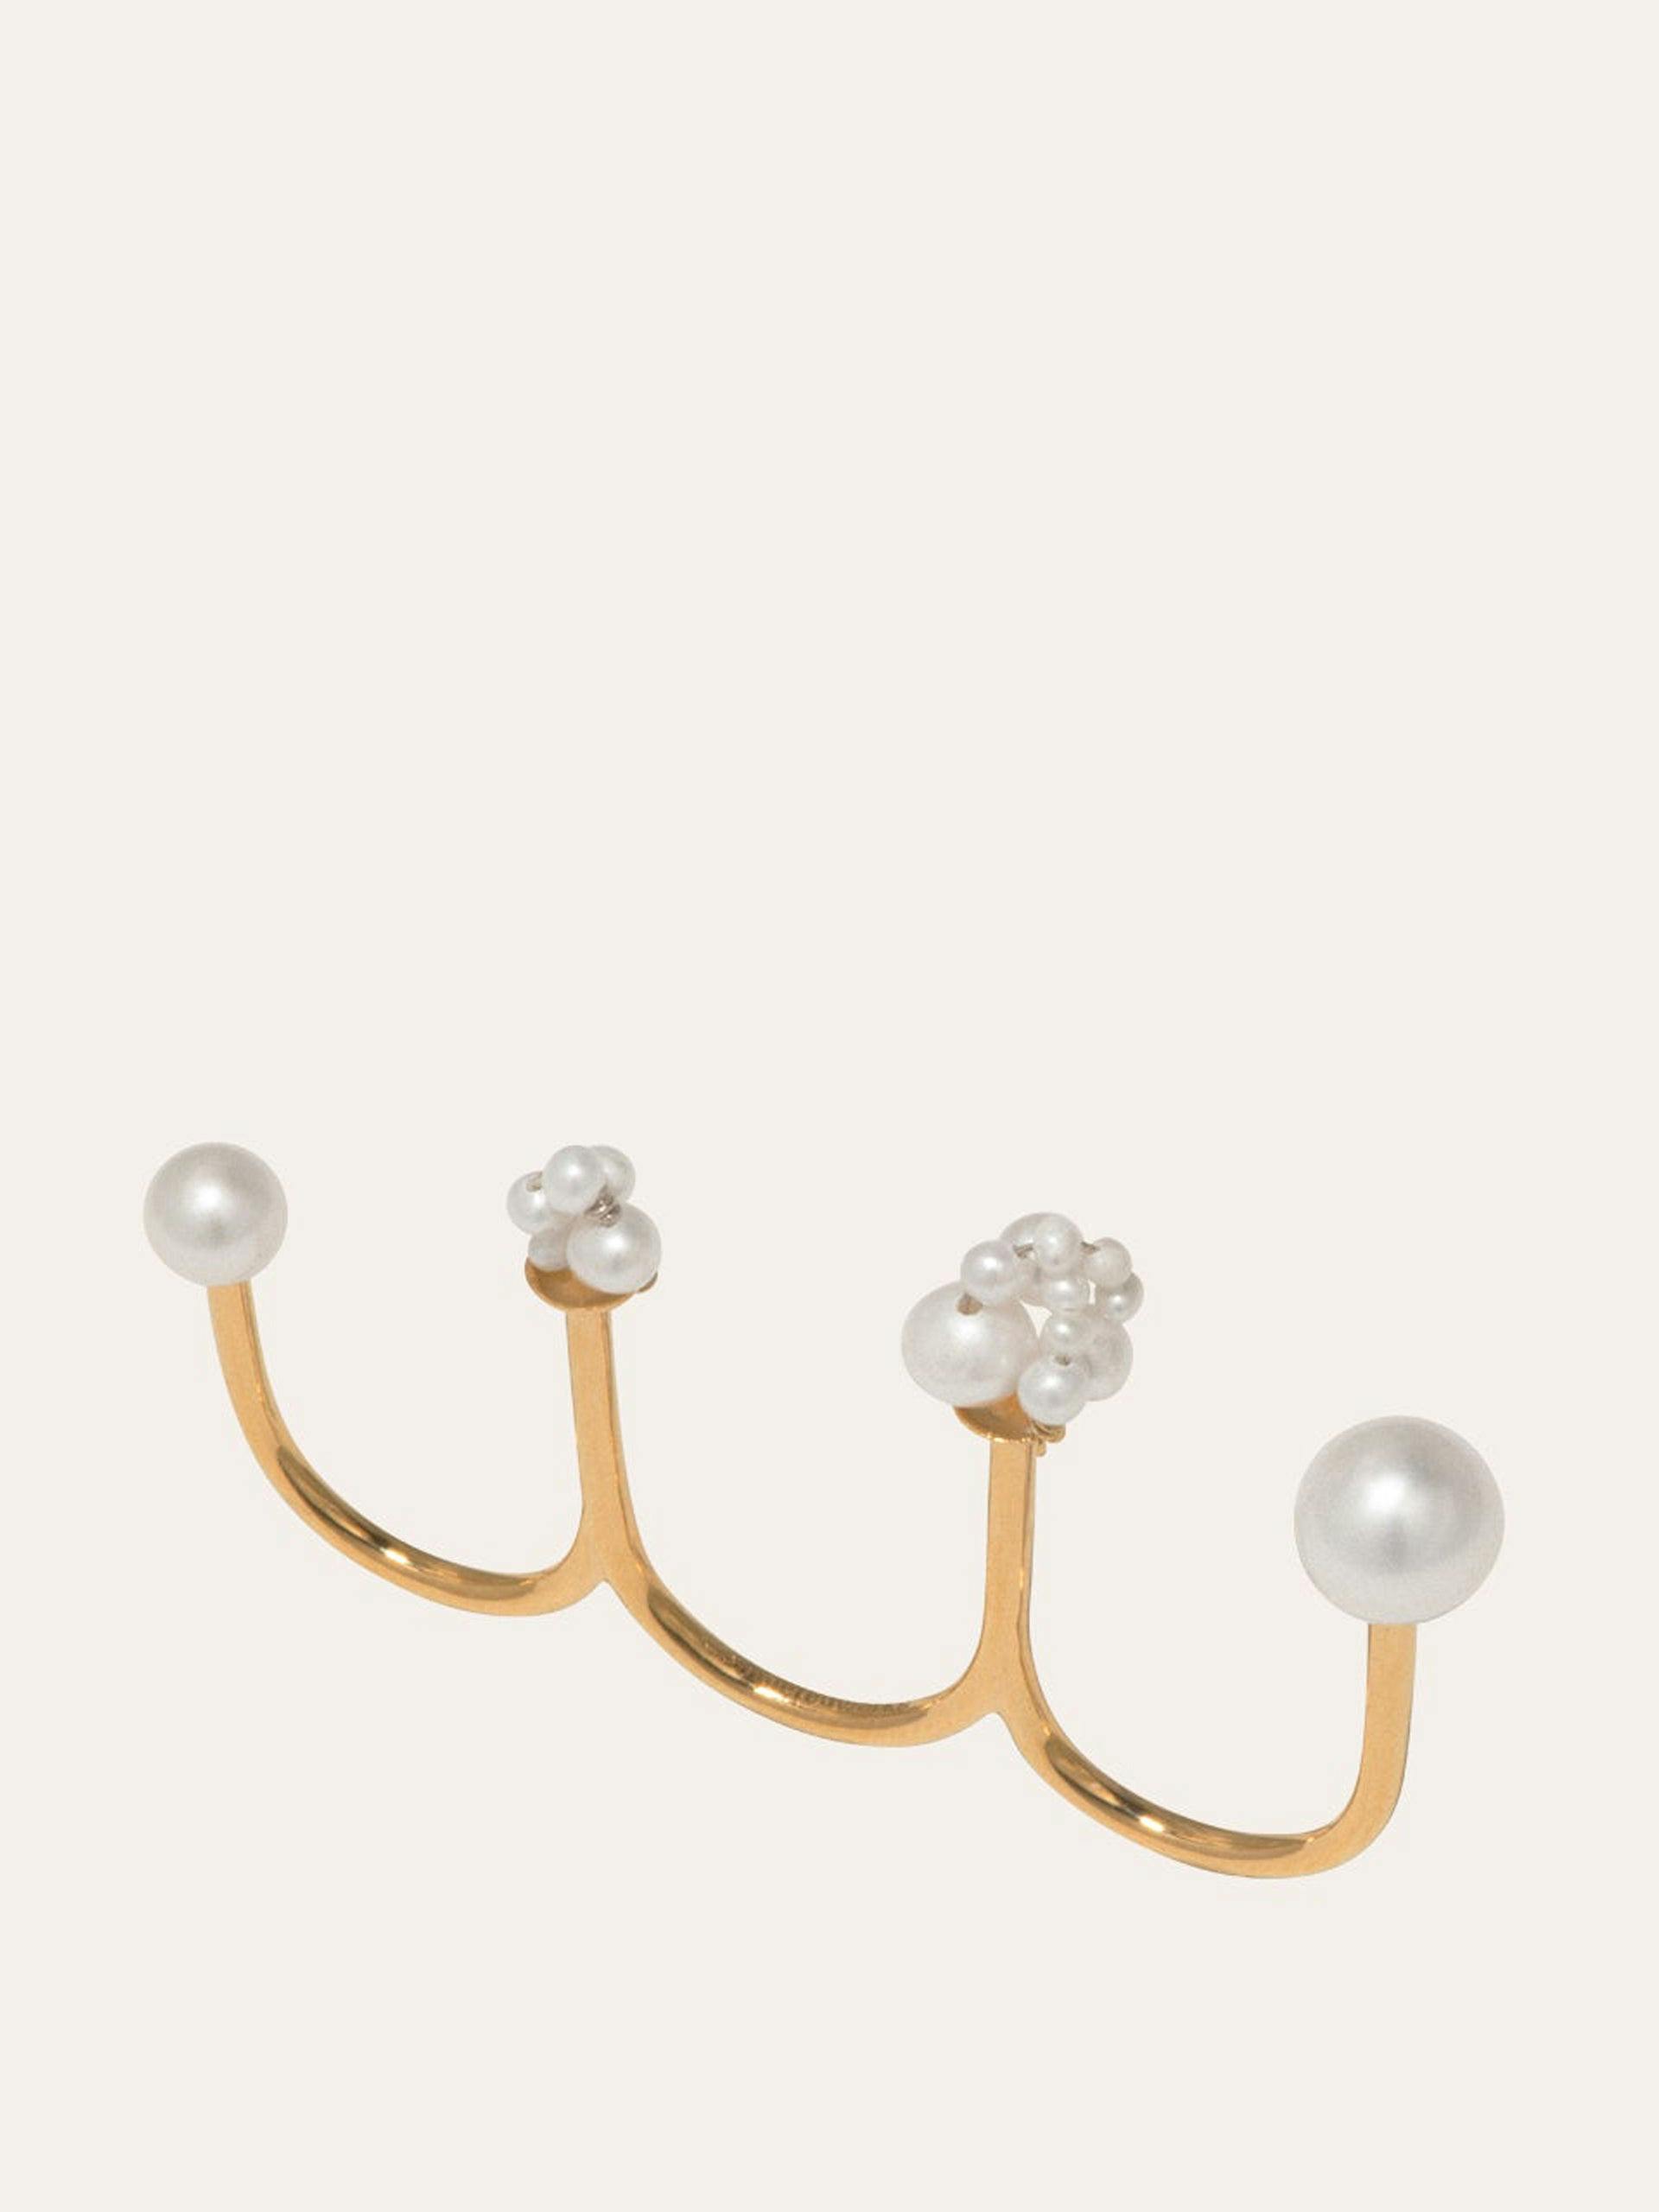 "The Reflection of the Moon" pearl and gold vermeil ring